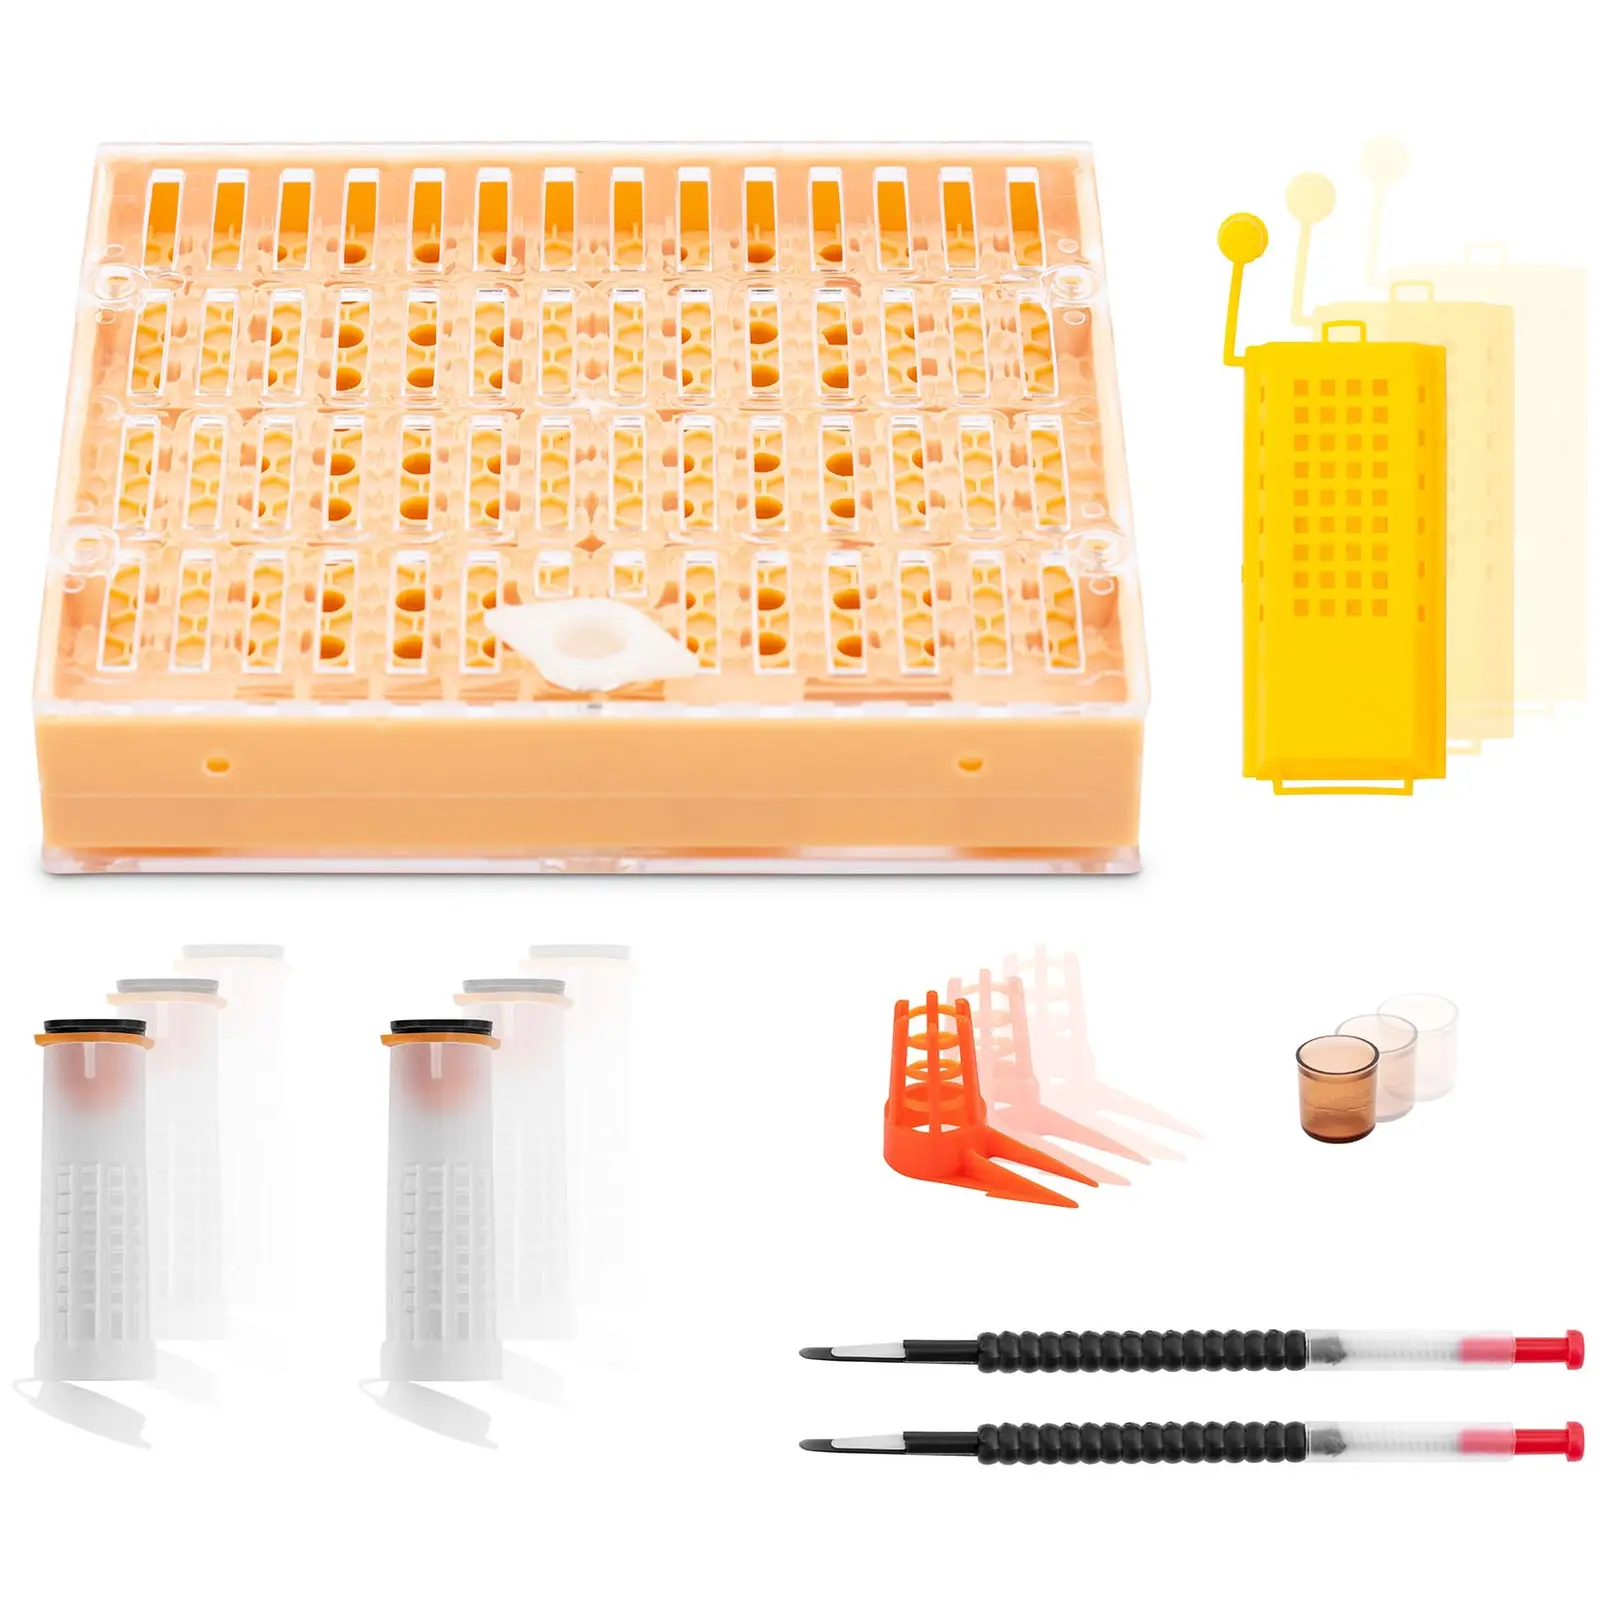 Beekeeping Starter Kit - queen rearing - 322-pcs - transfer spoon - cell cups - hatching cells